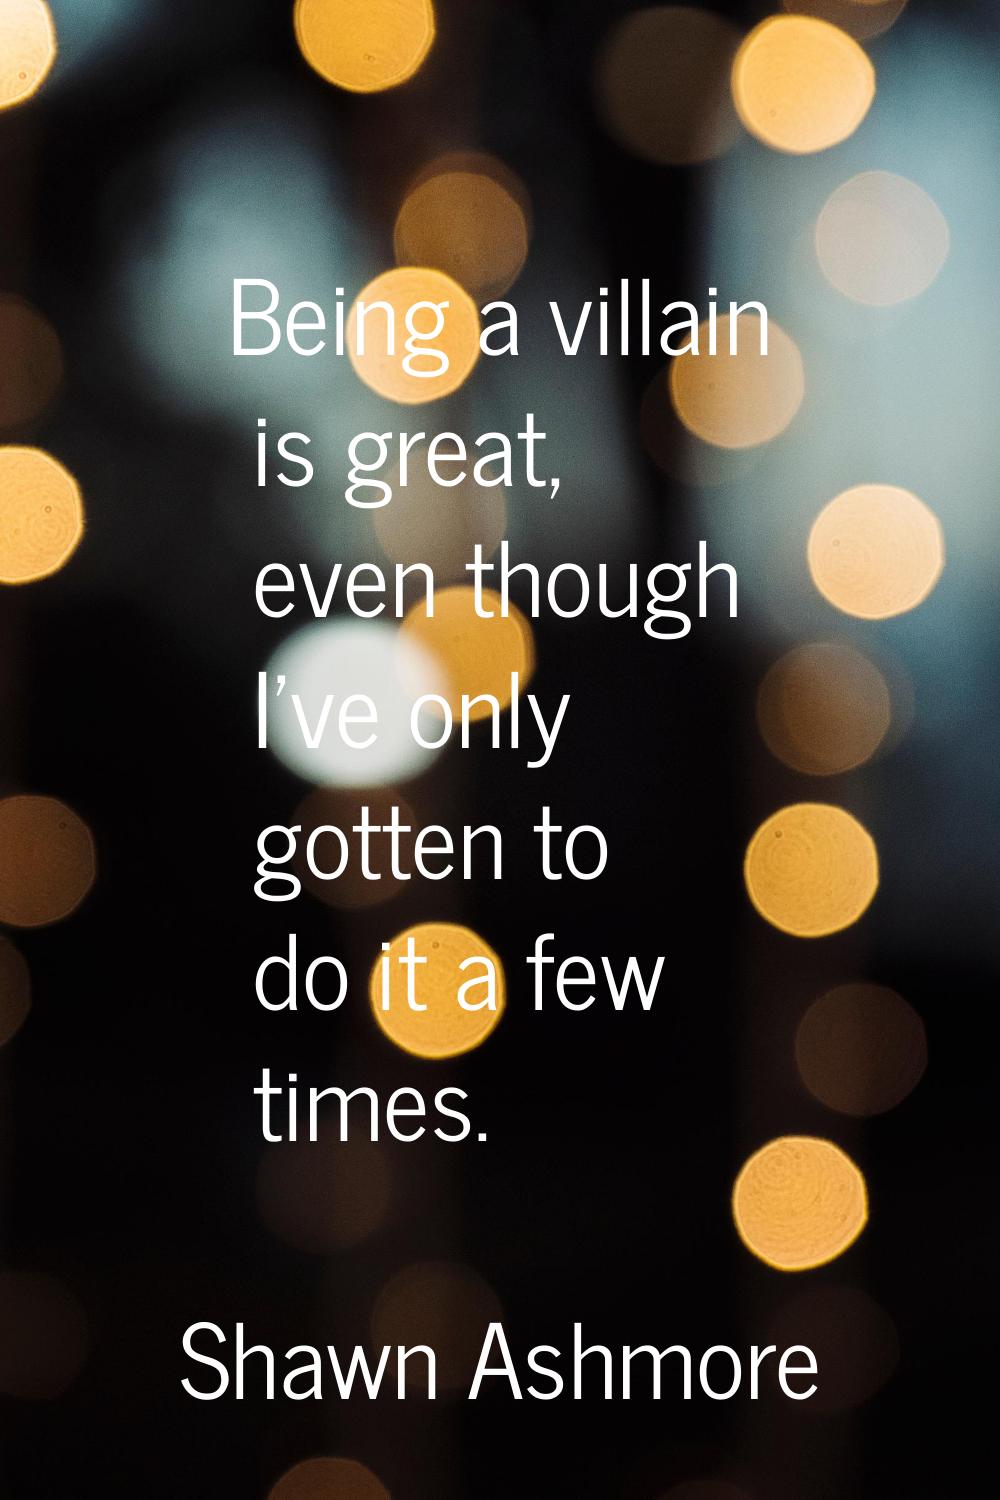 Being a villain is great, even though I've only gotten to do it a few times.